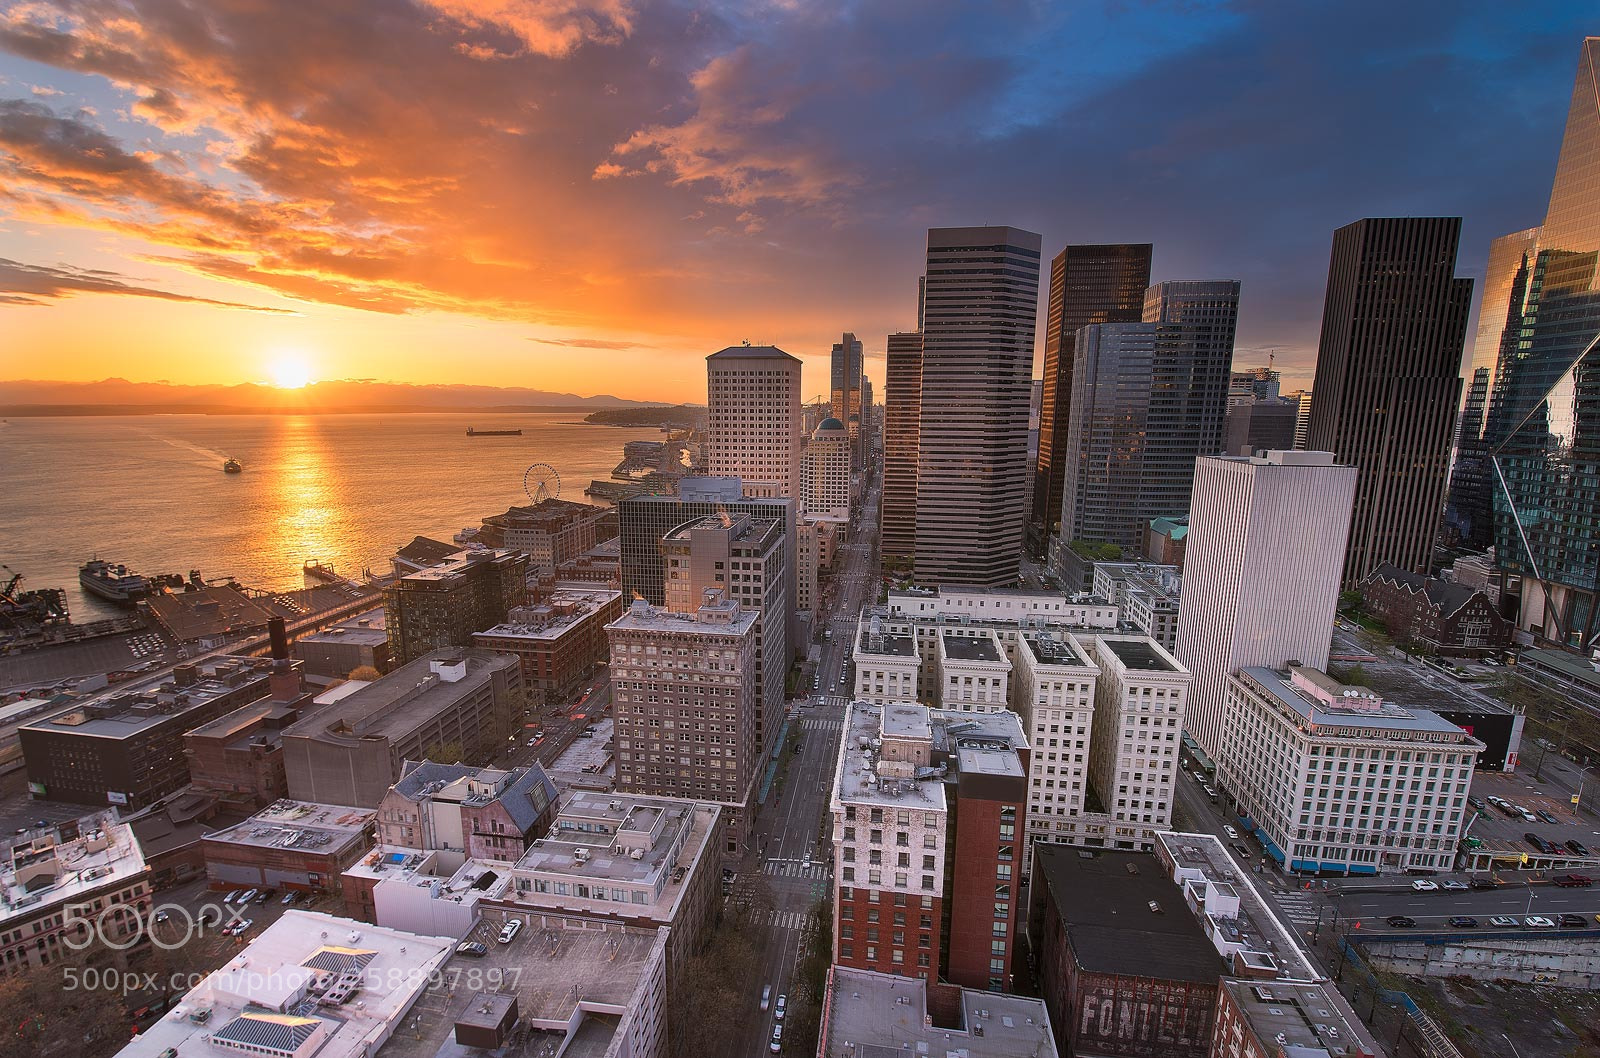 Sony a7 II sample photo. Sunset over seattle photography